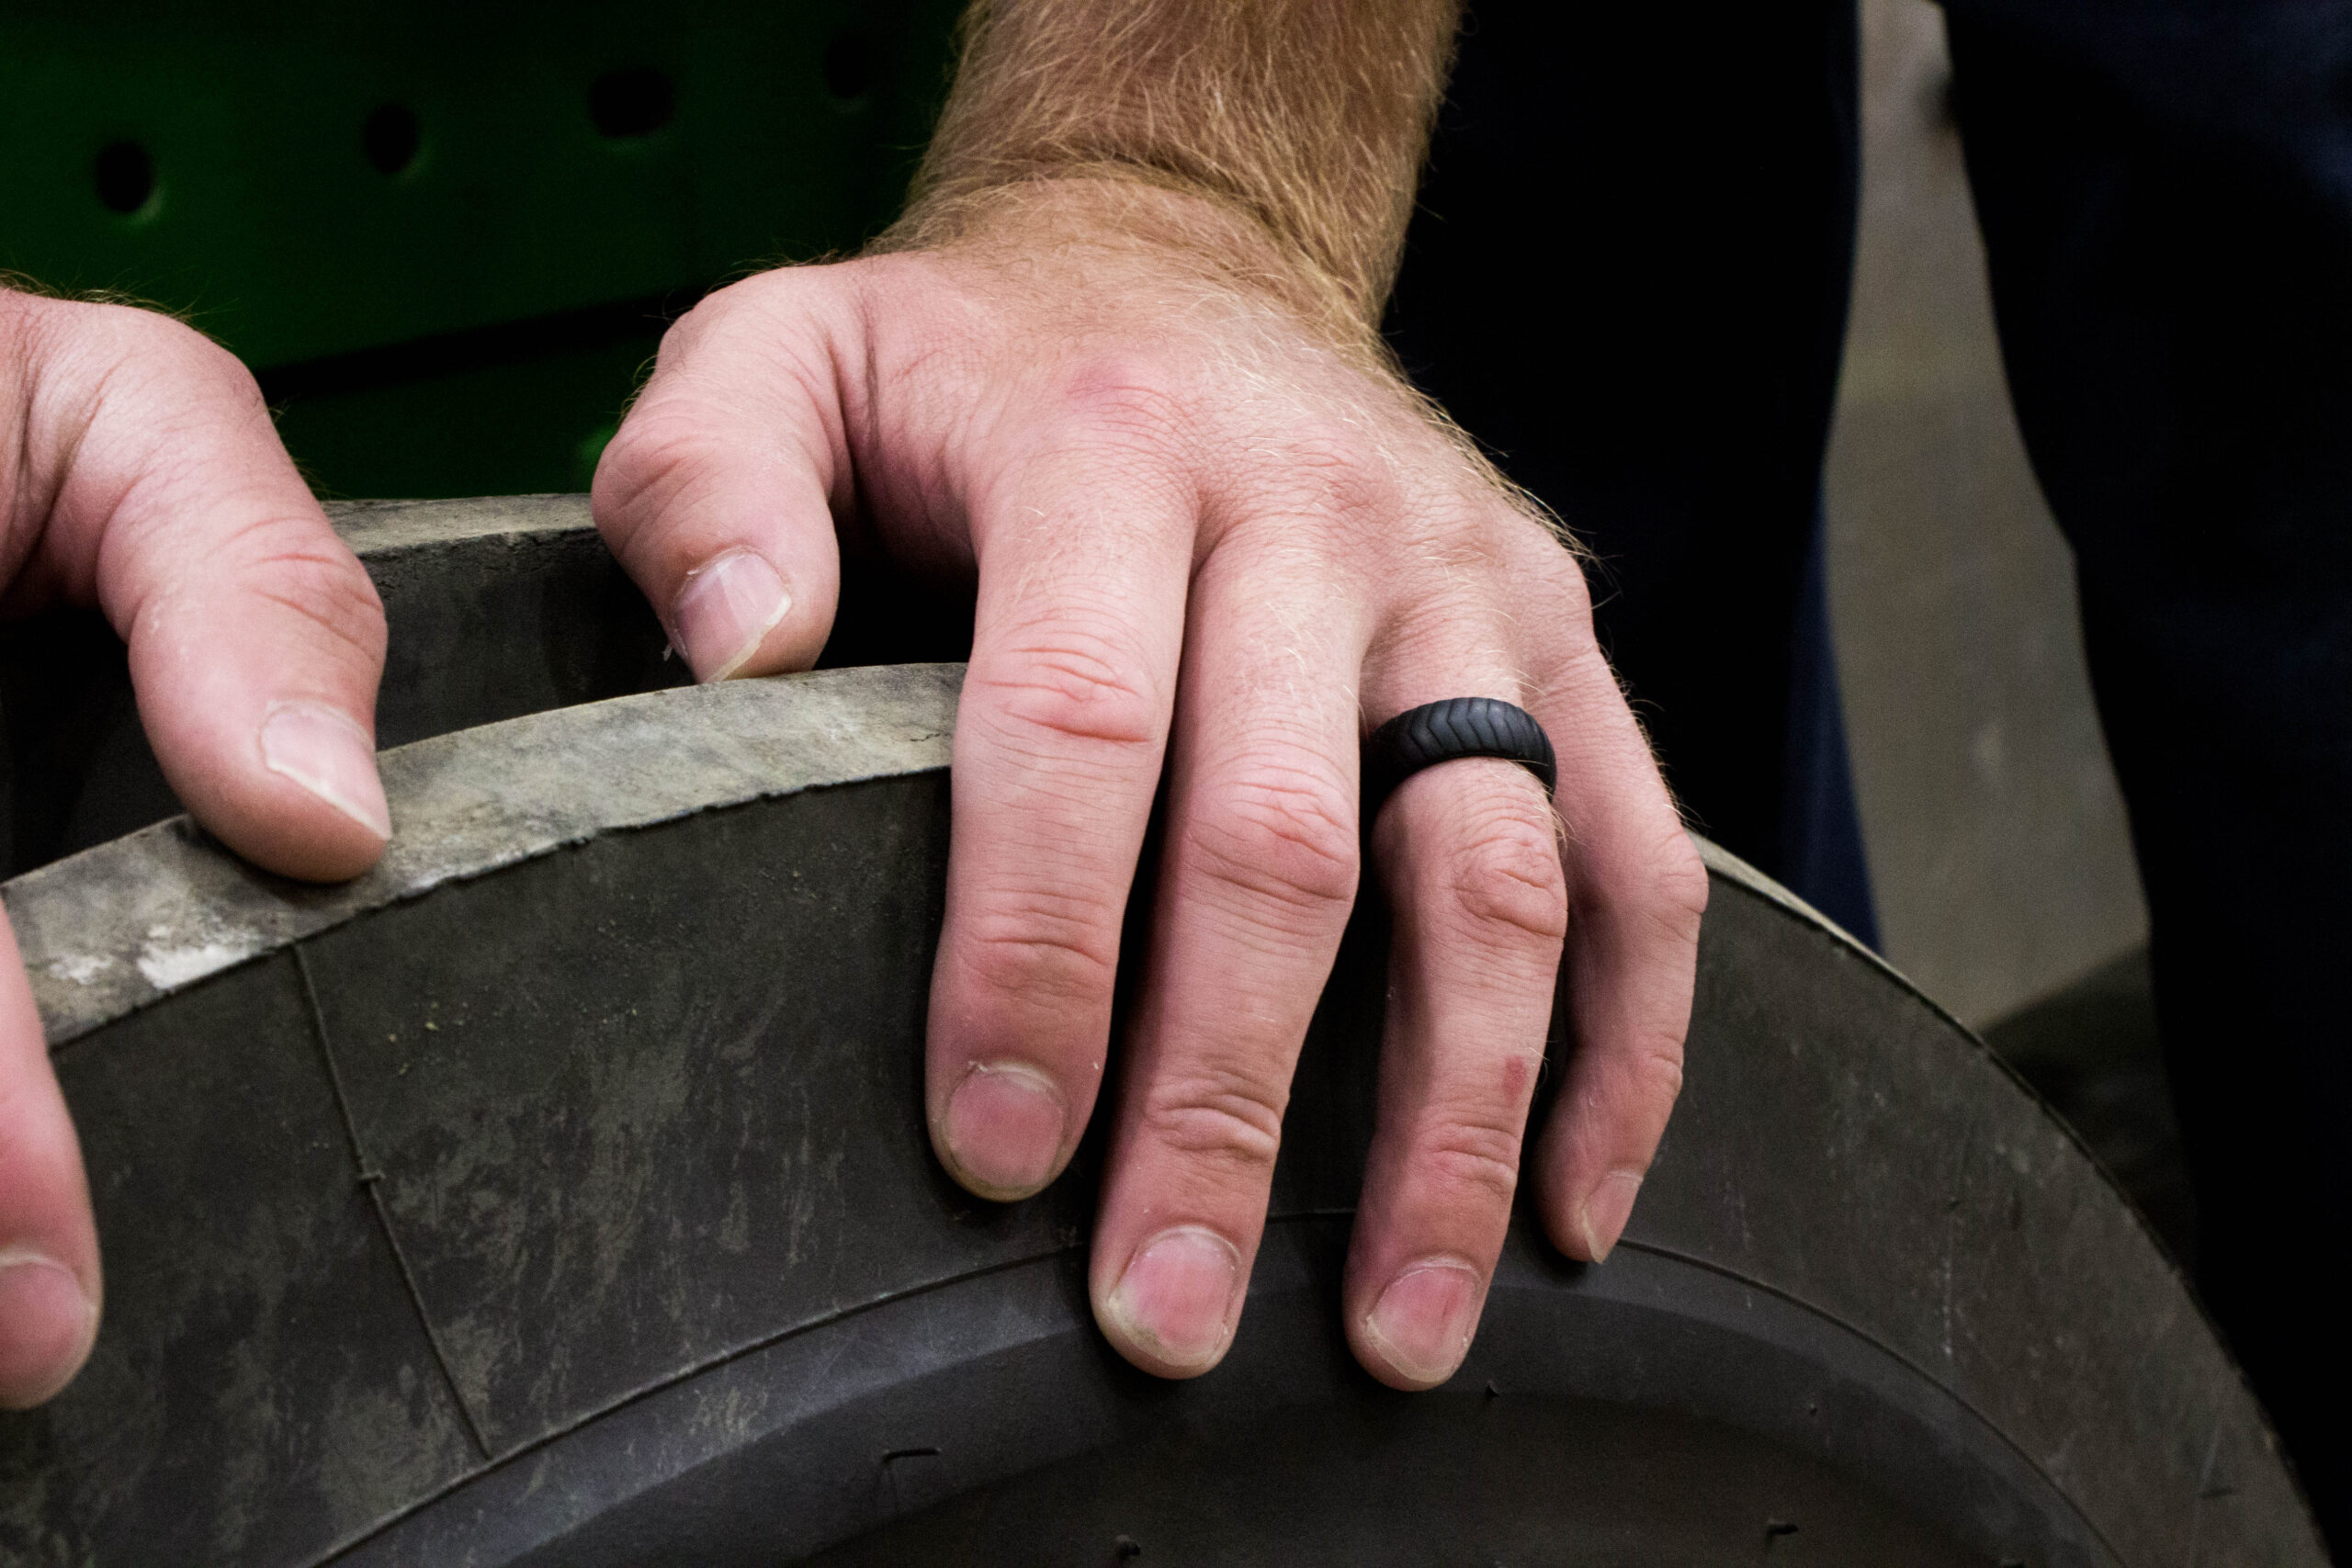 Man's hand on large tire, wearing silicone ring.